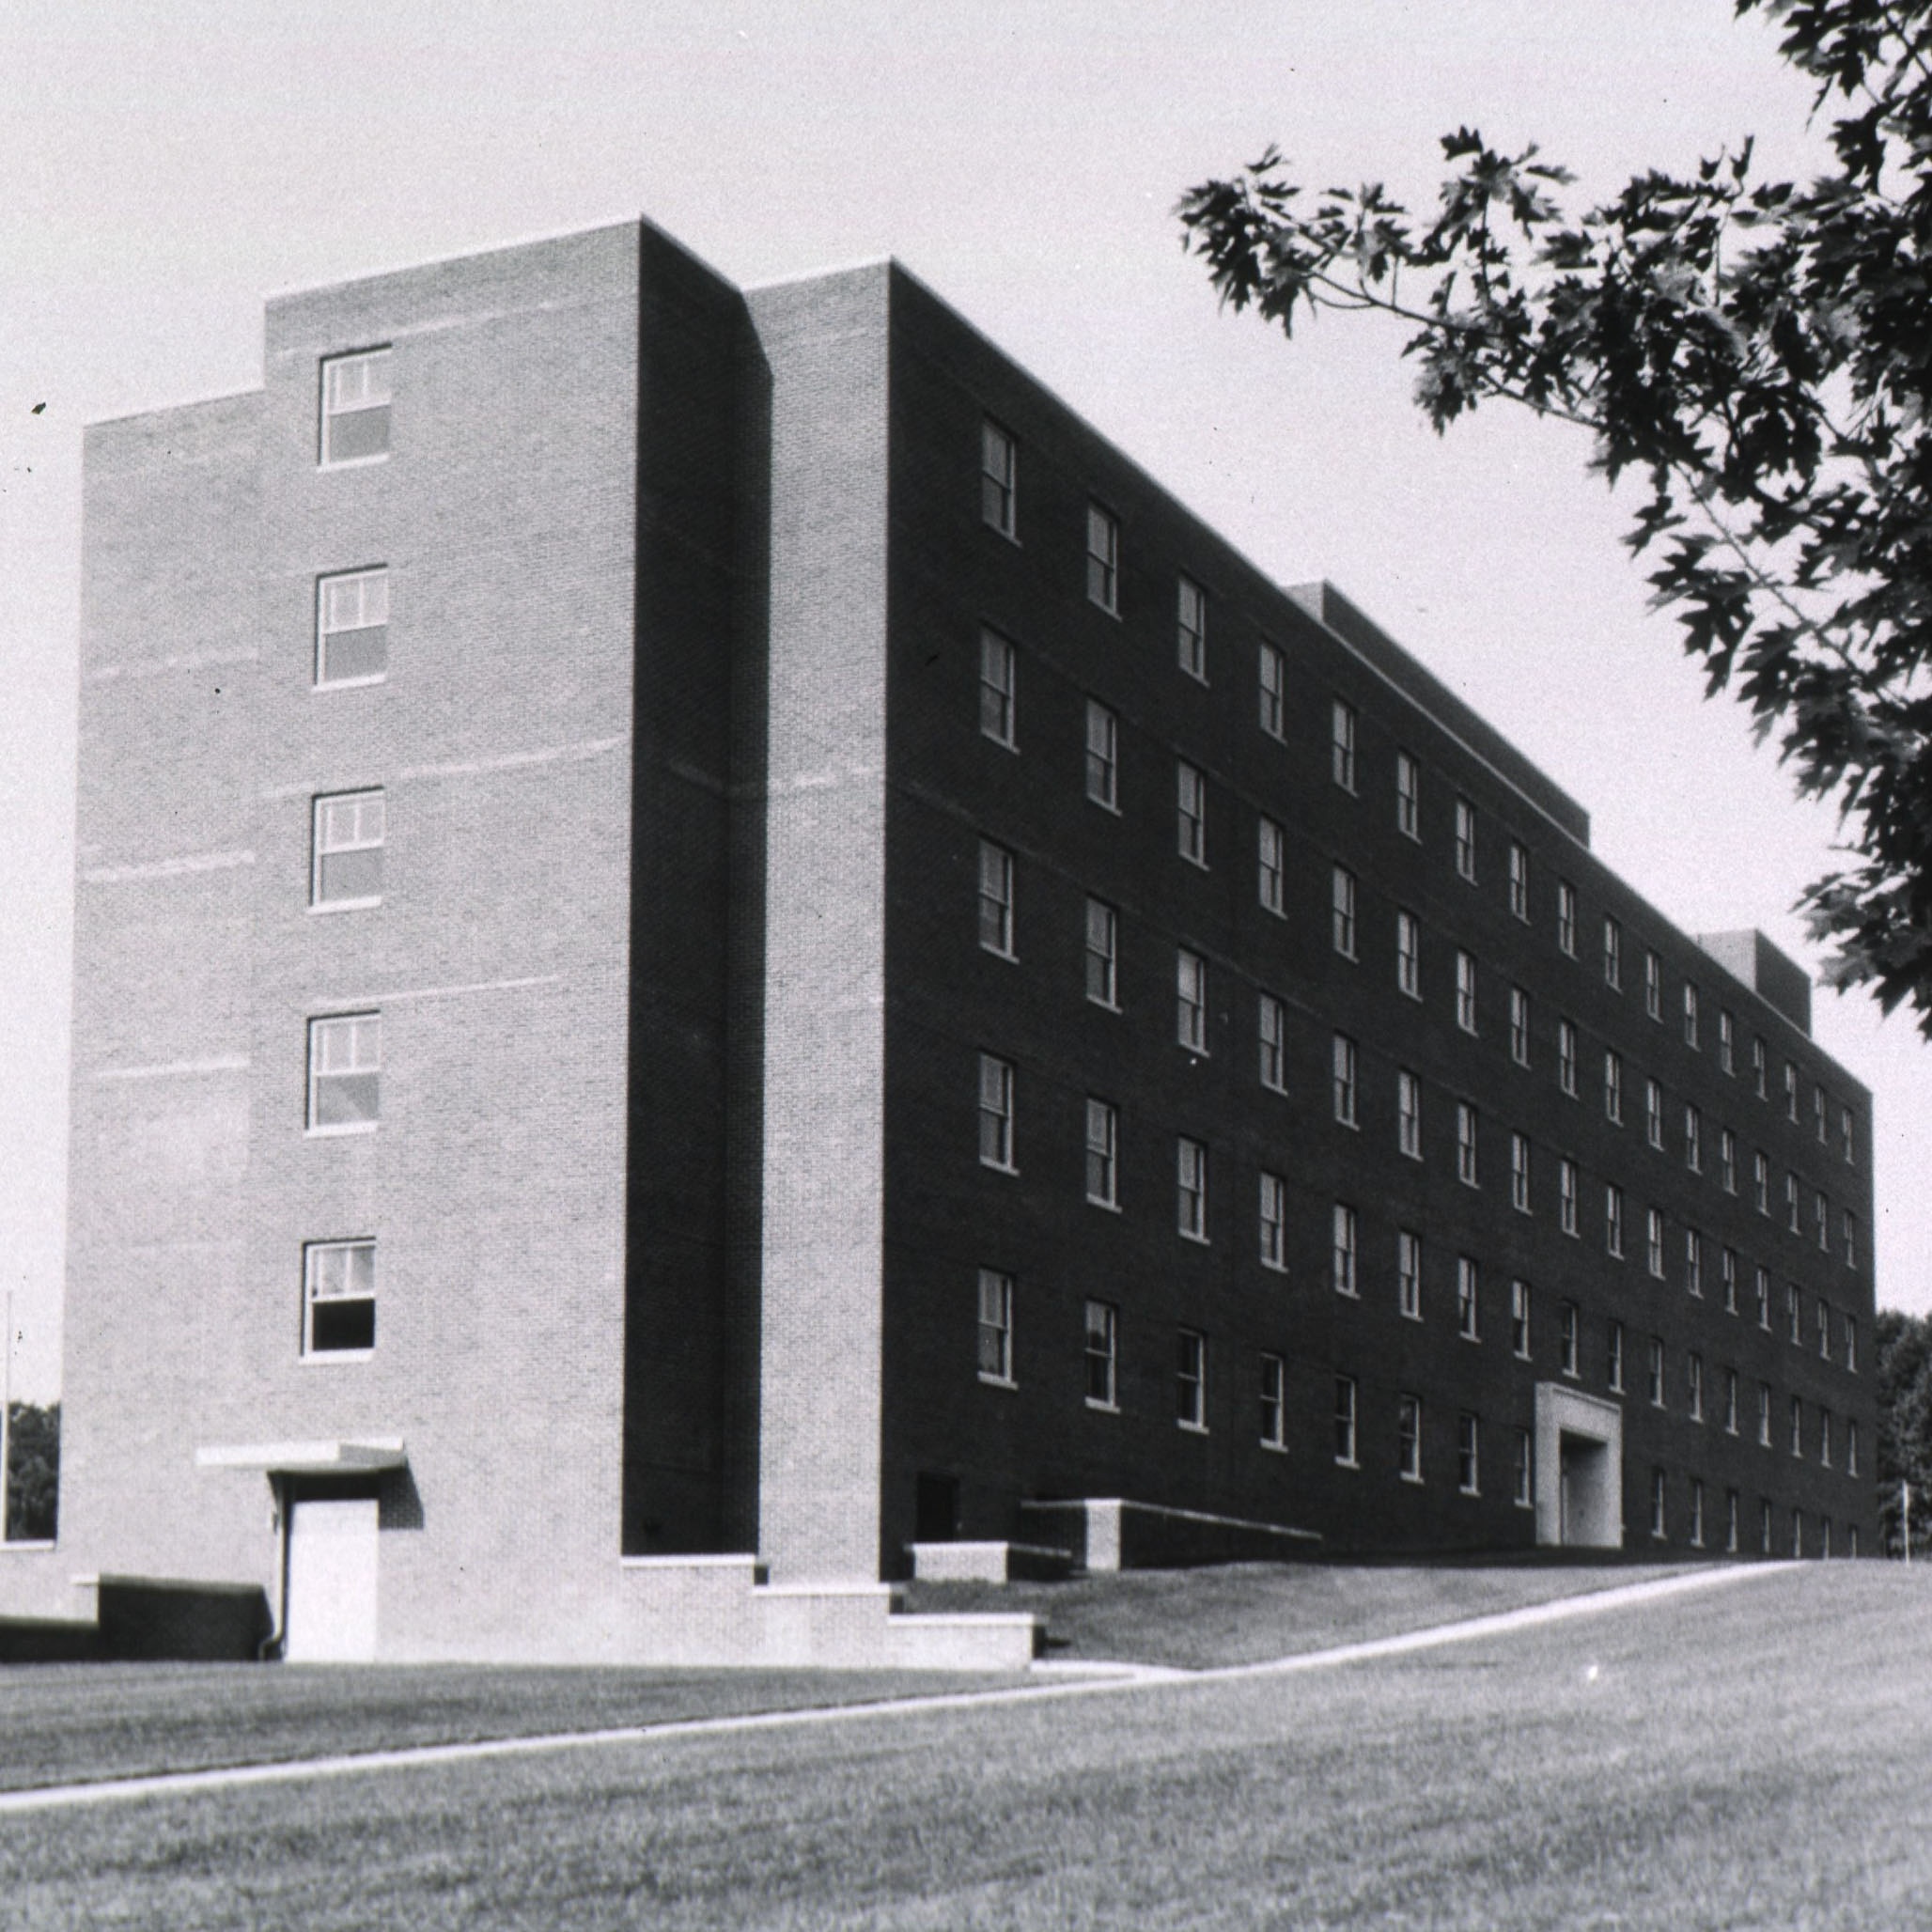 Image of Building 29 to represent Buildings